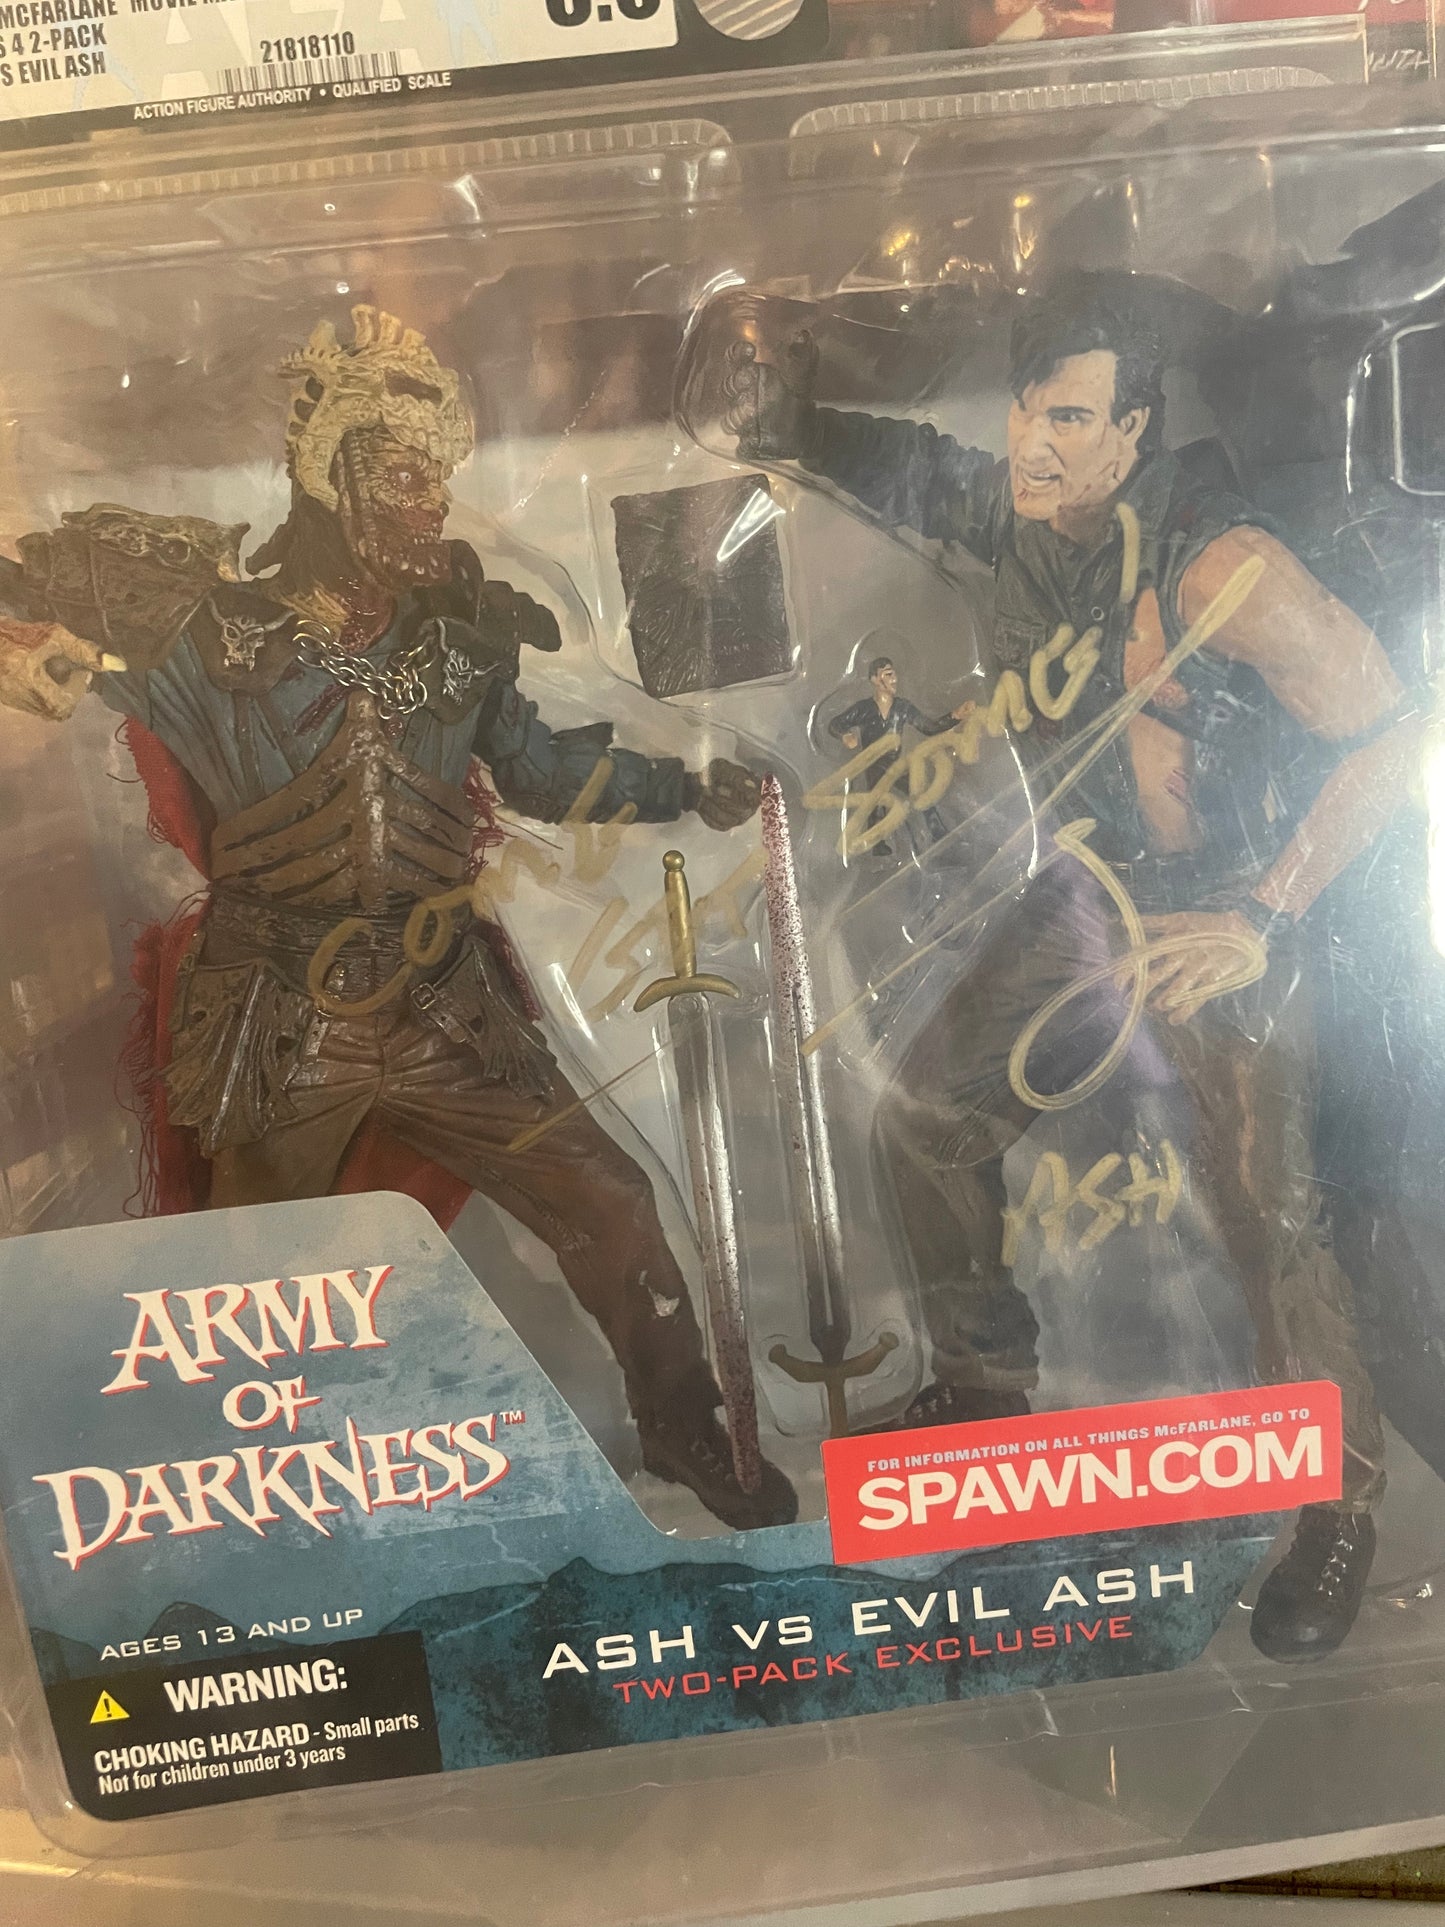 Army of Darkness Ash Vs Evil Ash Two-Pack Exclusive McFarlane Toys AFA 8.0 SIGNED by Bruce Campbell